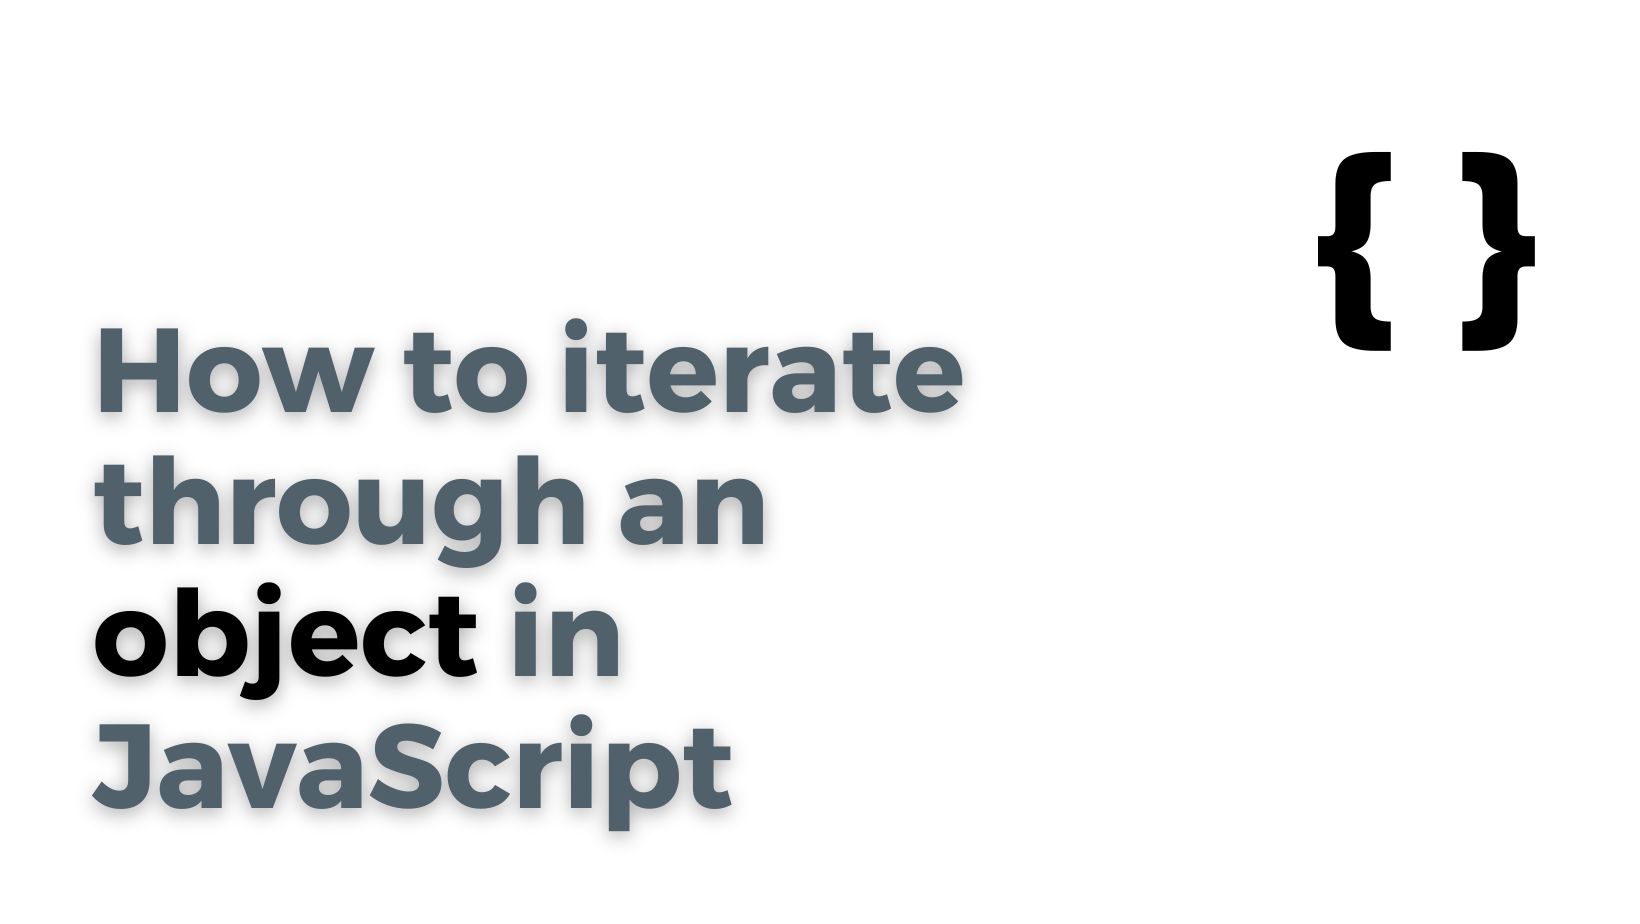  How to iterate through an object in JavaScript